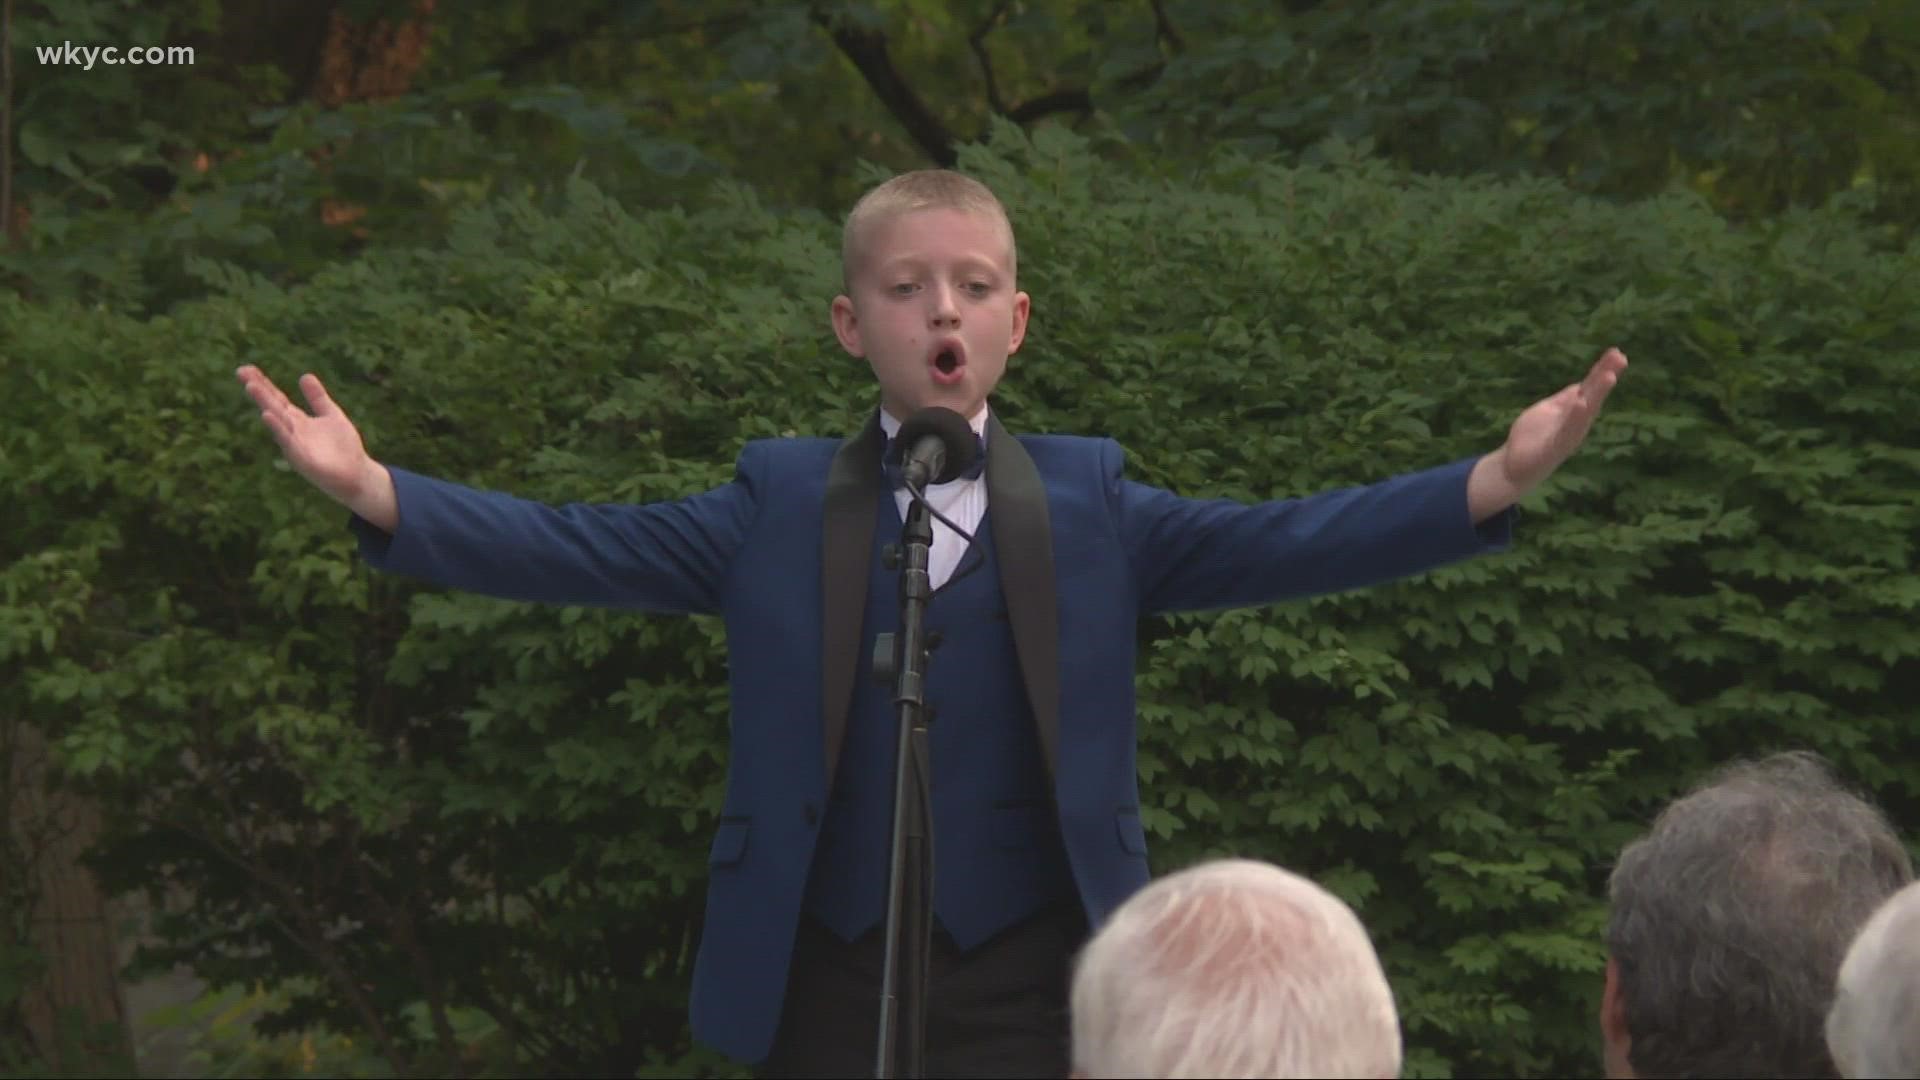 Eleven-year-old Alex Cosma is typical in many ways, until he opens his mouth to sing.